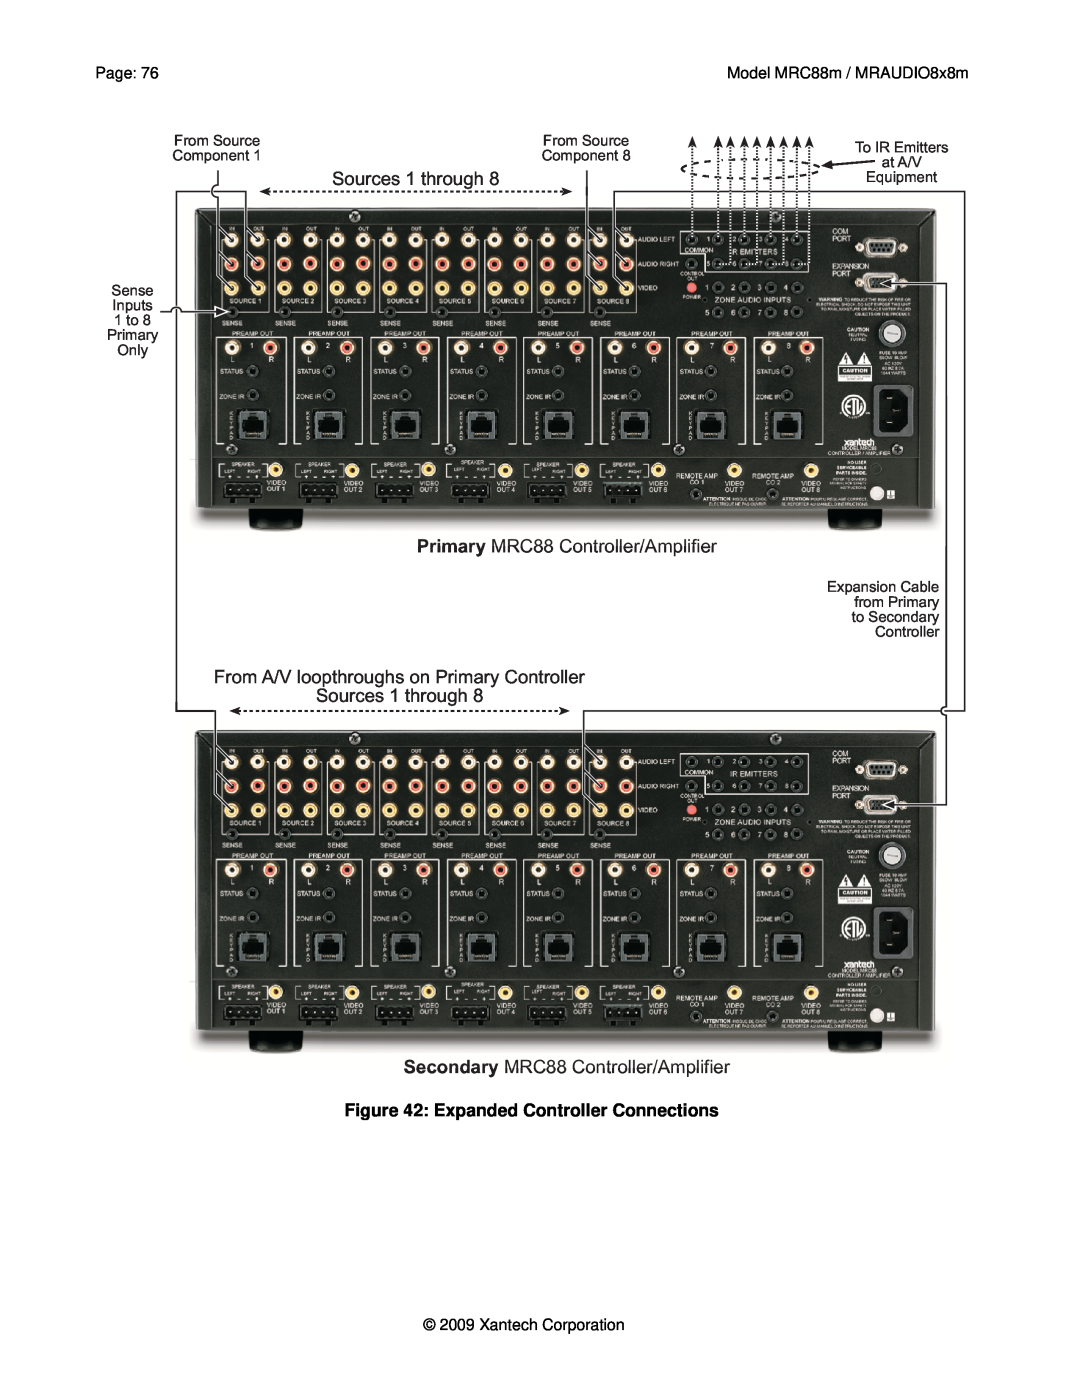 Xantech MRC88M Sources 1 through, Primary MRC88 Controller/Amplifier, From A/V loopthroughs on Primary Controller, Page 